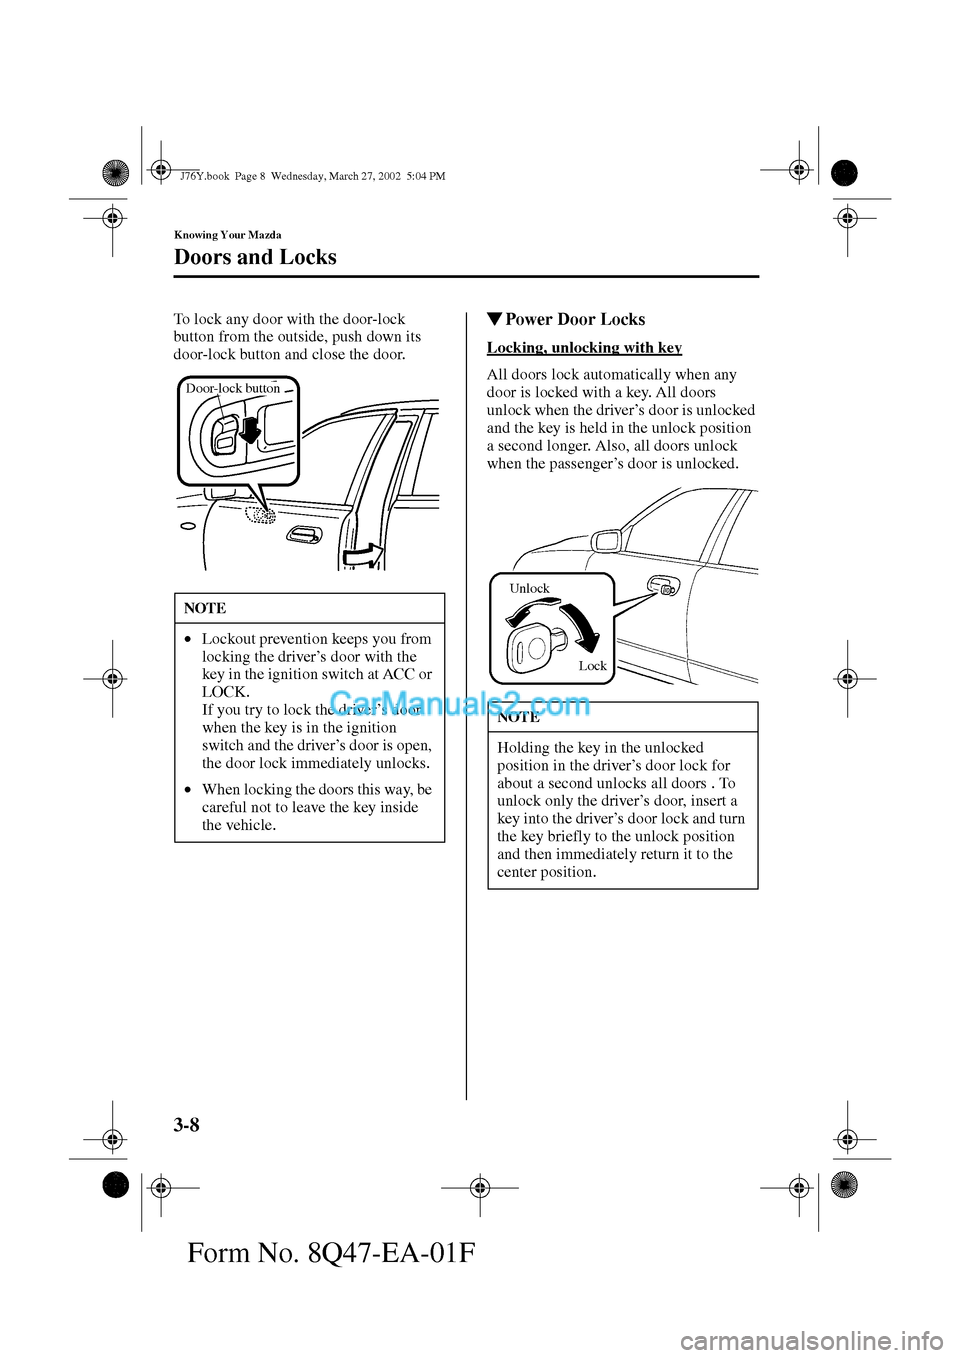 MAZDA MODEL MILLENIA 2002  Owners Manual (in English) 3-8
Knowing Your Mazda
Doors and Locks
Form No. 8Q47-EA-01F
To lock any door with the door-lock 
button from the outside, push down its 
door-lock button and close the door.Power Door Locks
Locking, 